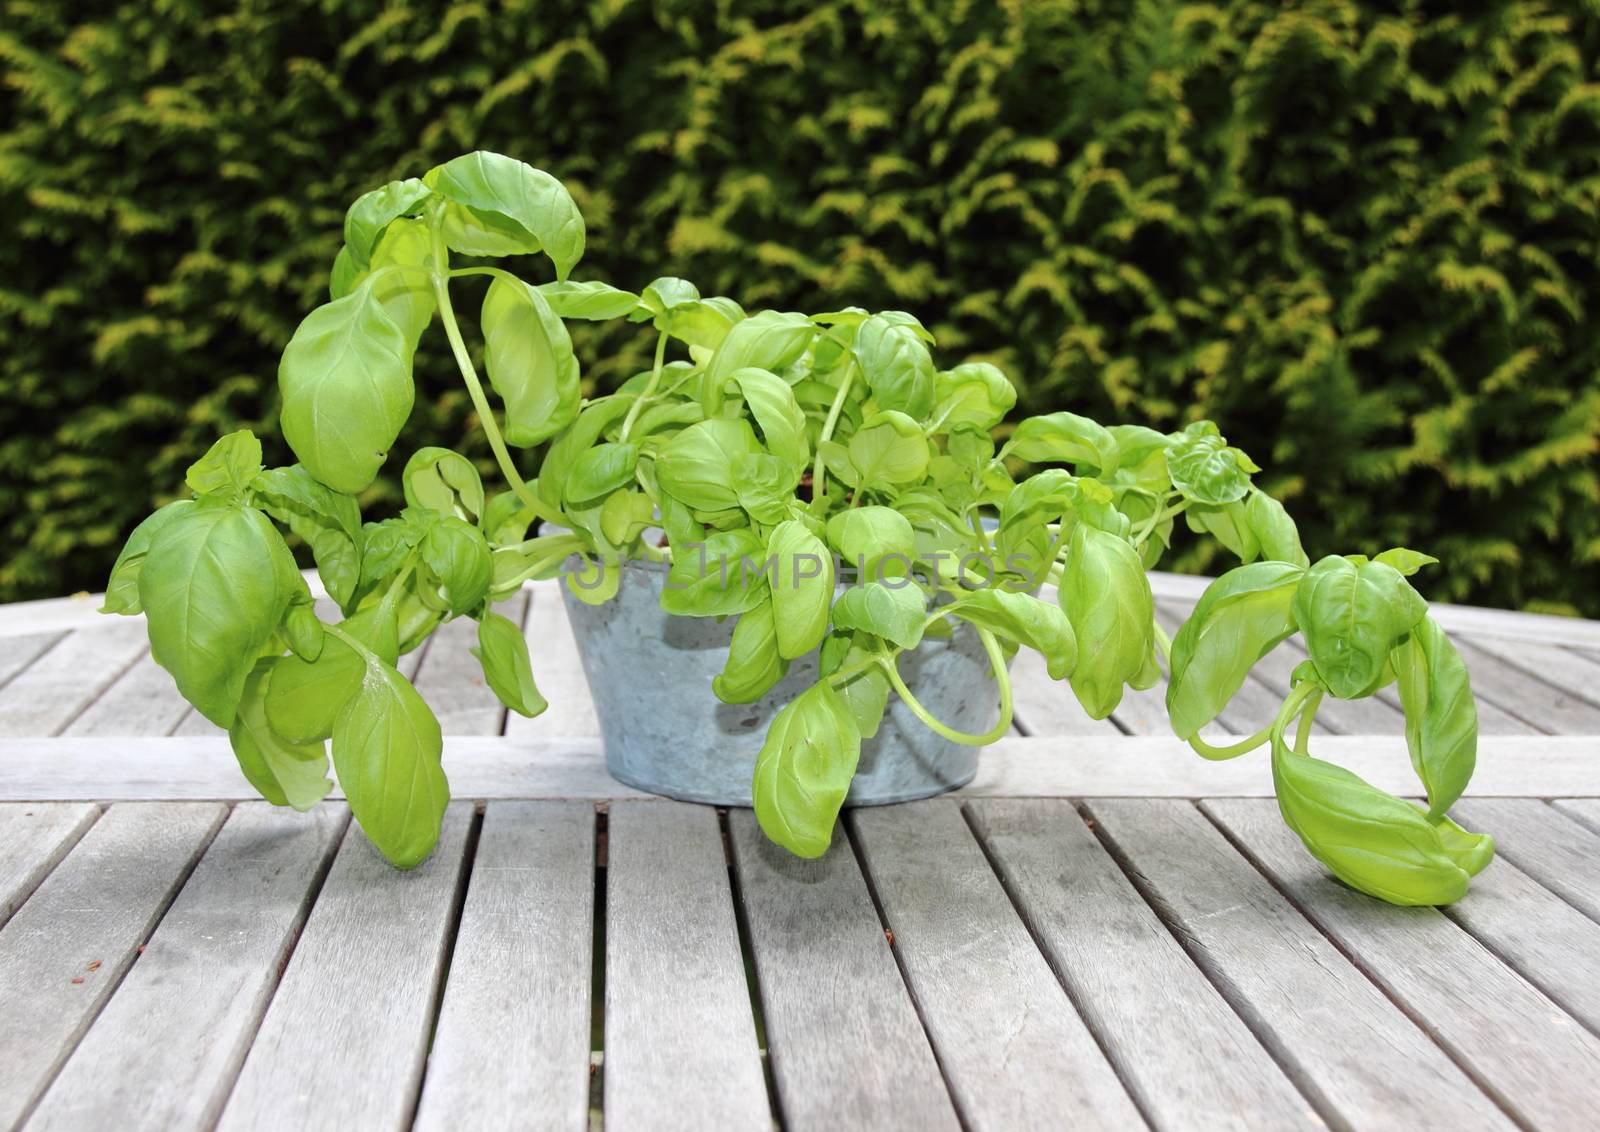 Basil plant in zinc bowl on wooden table